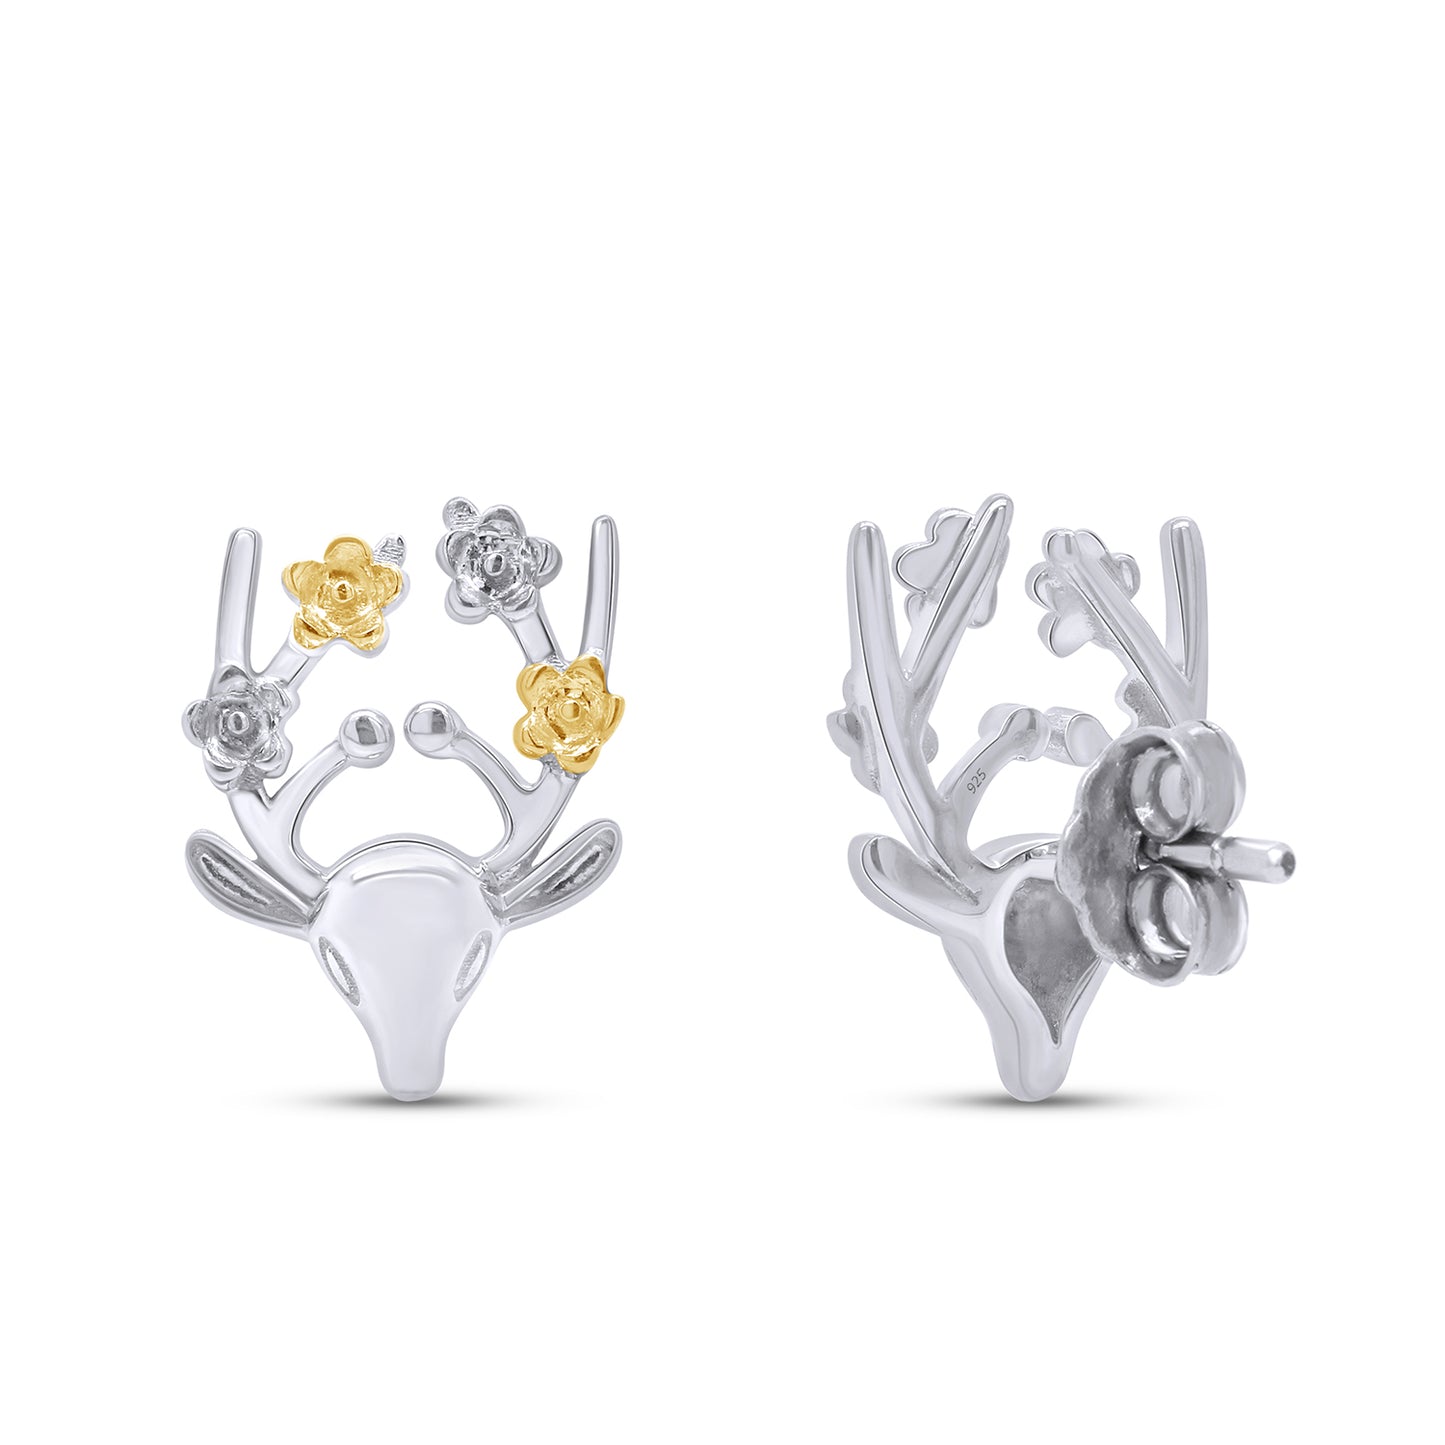 Load image into Gallery viewer, Swamp Deer Animal Two Tone Stud Earrings in 925 Sterling Silver Jewelry Gift for Women
